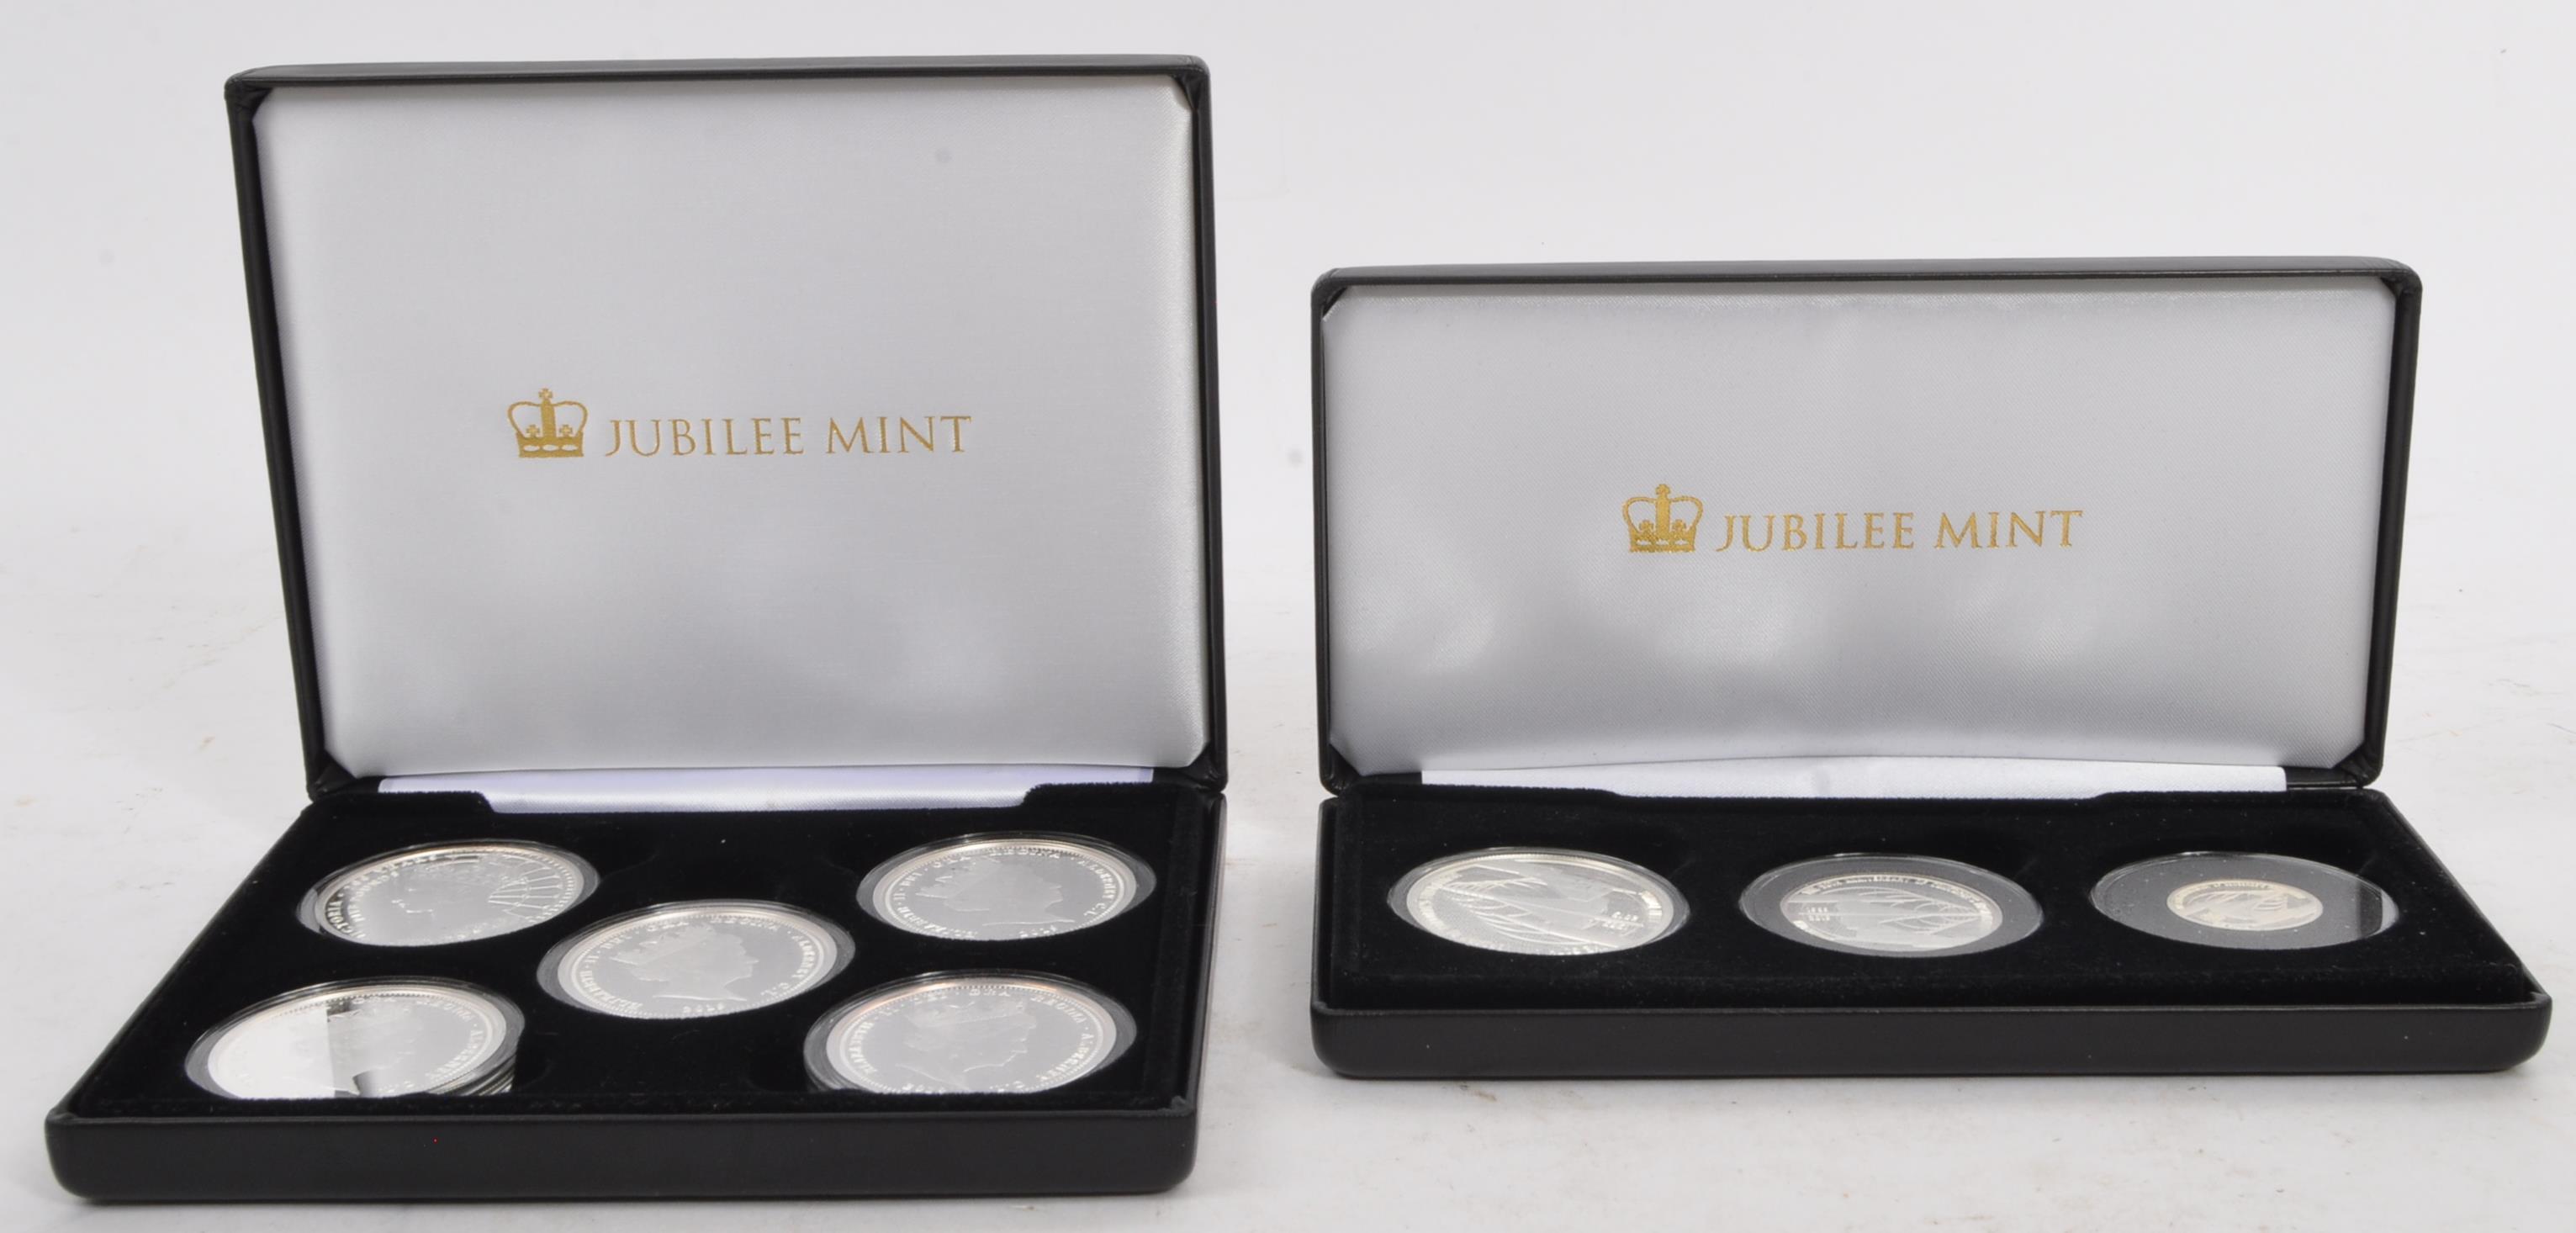 TWO JUBILEE MINT 2019 ANNIVERSARY SILVER PROOF COIN SETS